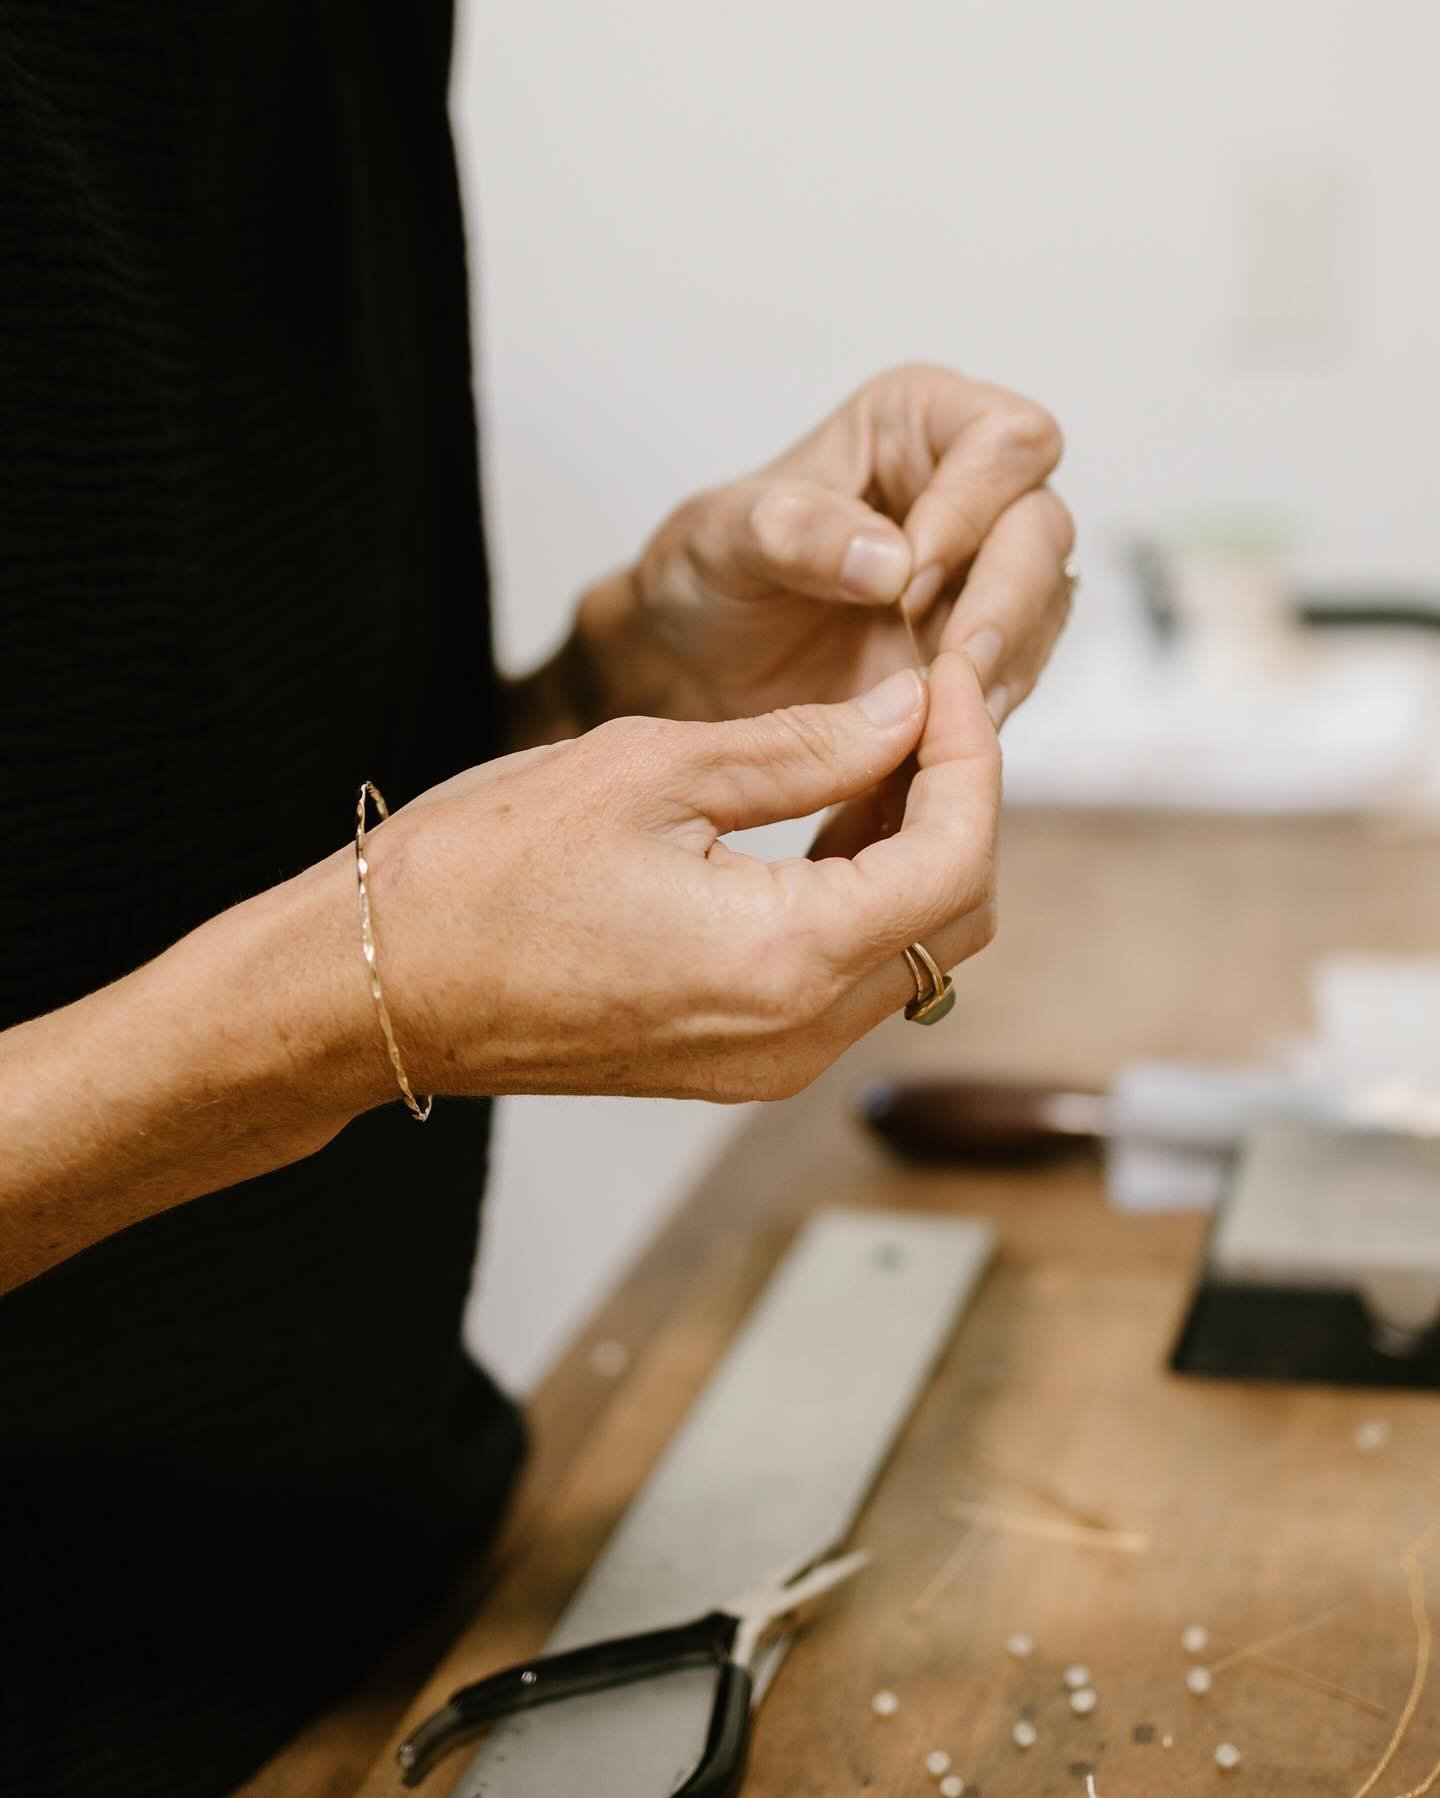 Made by moms for moms. Our jewelry is intentionally designed and made to be versatile and long lasting &mdash; two things that we look for, as moms, in the pieces we buy. And with Mother&rsquo;s Day right around the corner, we think they would be the